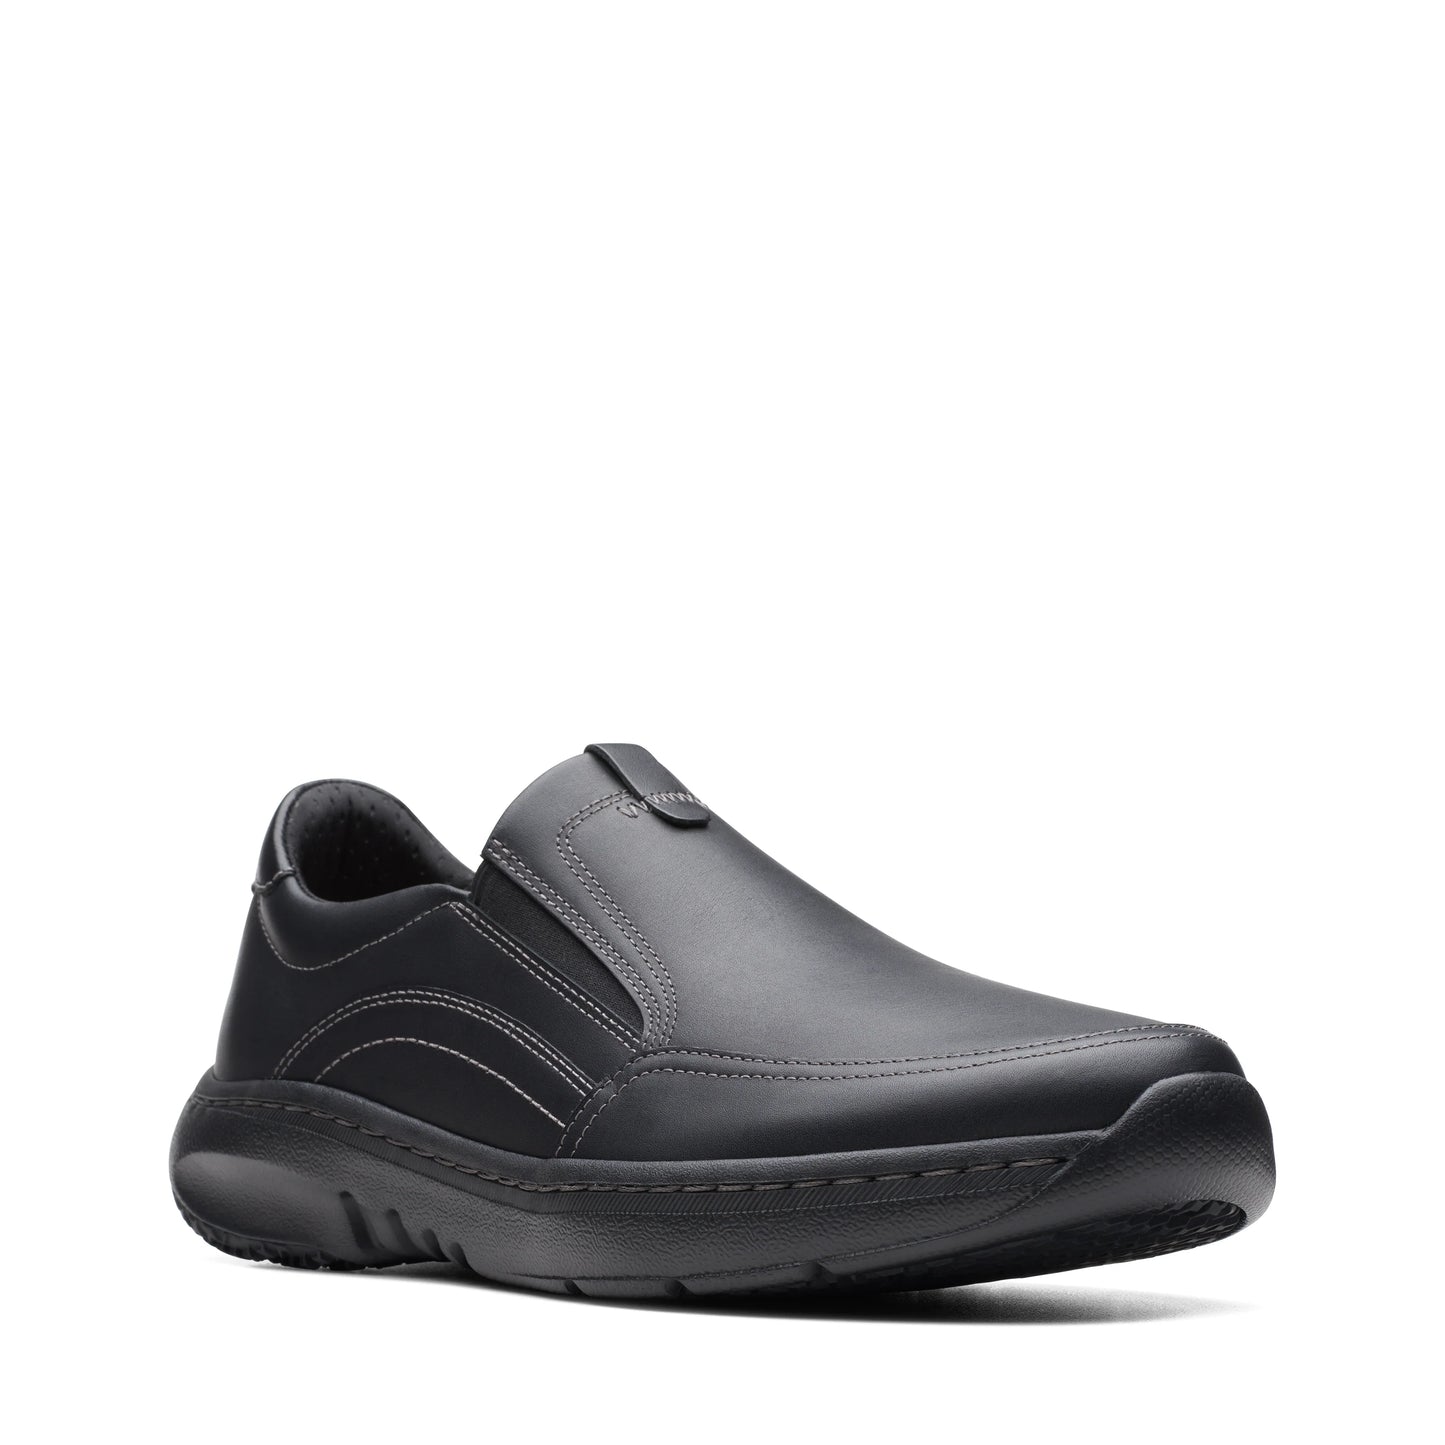 CLARKS | ZAPATOS DERBY HOMBRE | CLARKS PRO STEP BLACK LEATHER | NEGRO